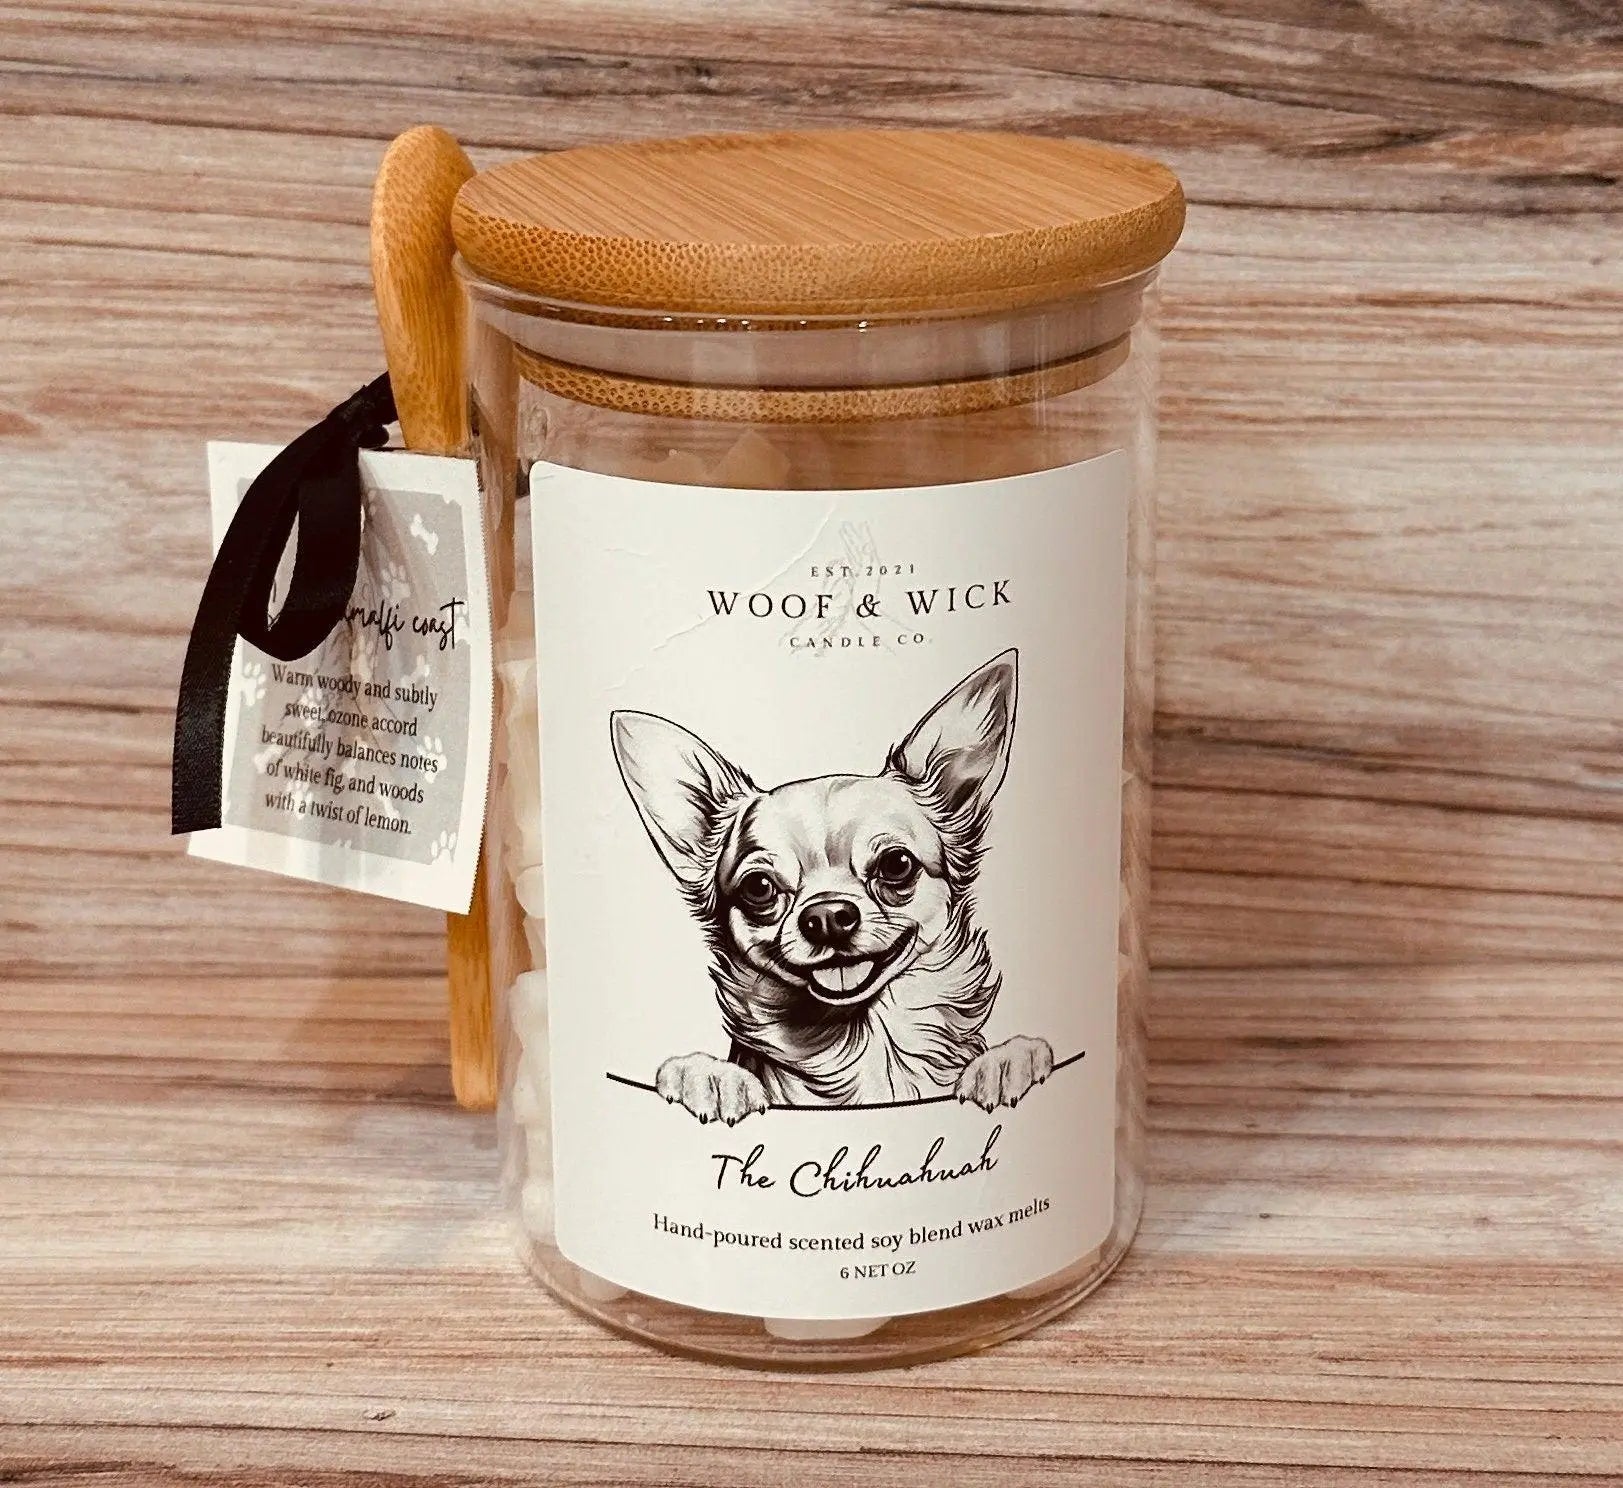 The Chihuahua - STRONG SCENTED Personalized Dog Breed Soy Wax Melts | Gift Ideas | Spring Scents | Wax Tarts | spring wax melts | - Woof & Wick Candle Co.